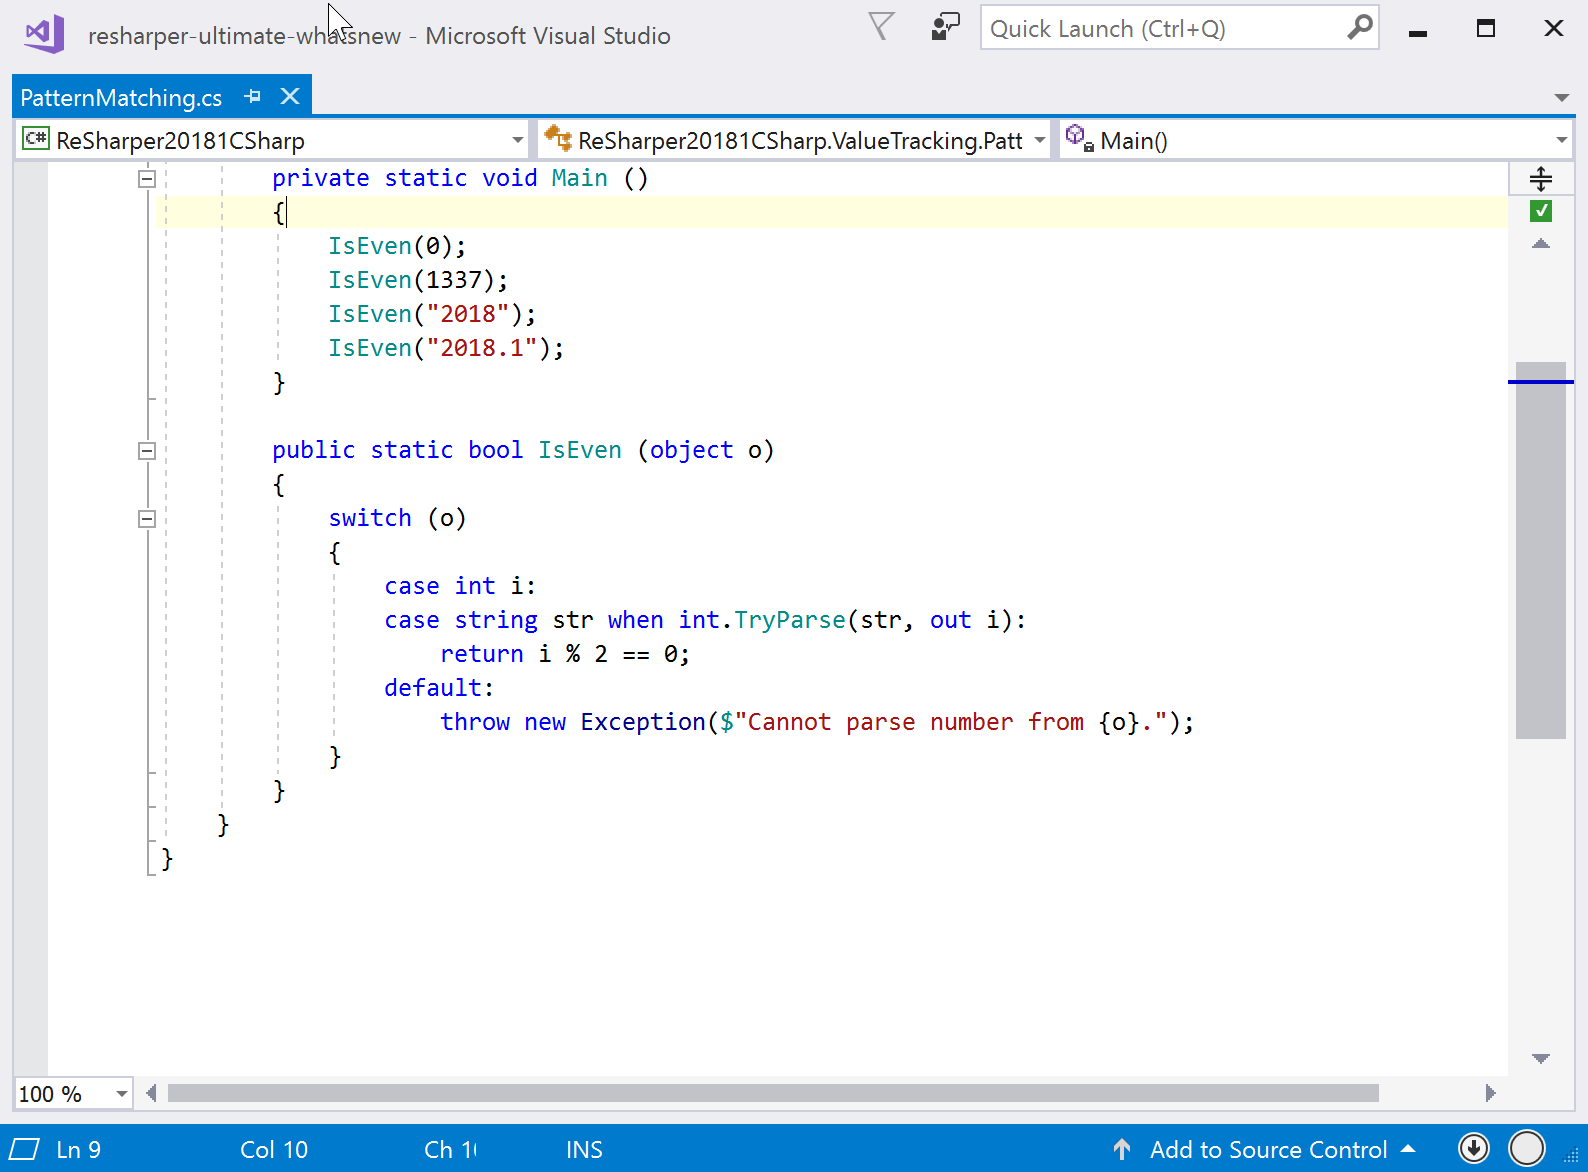 Support for new CSharp language features in value tracking